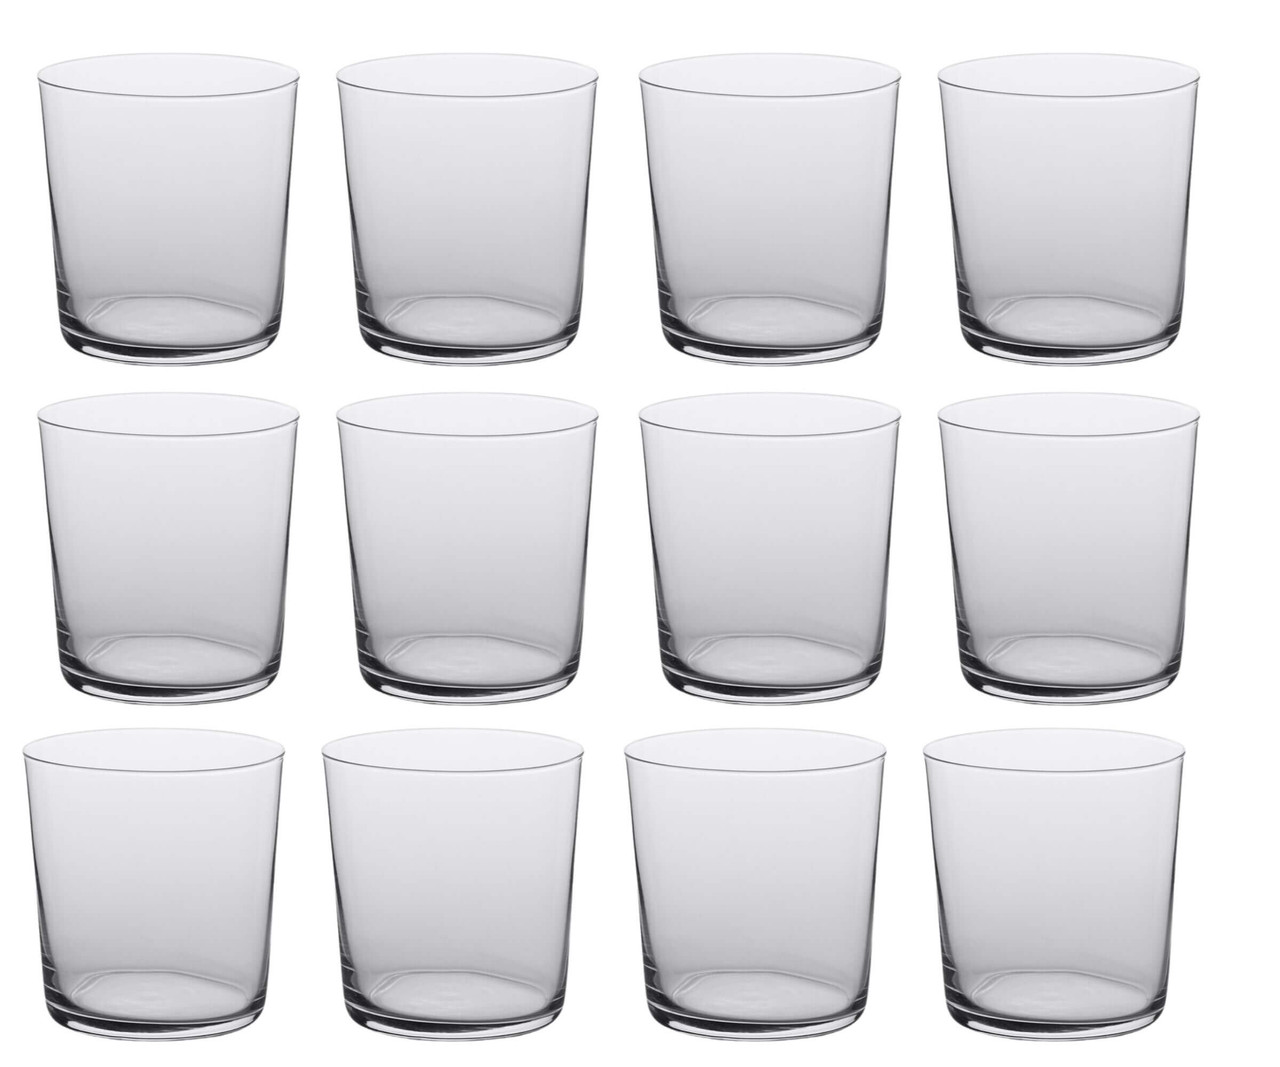 Libbey Cidra 12-Pack 13 oz. Rocks/Double Old Fashioned Glass-Chicken Pieces